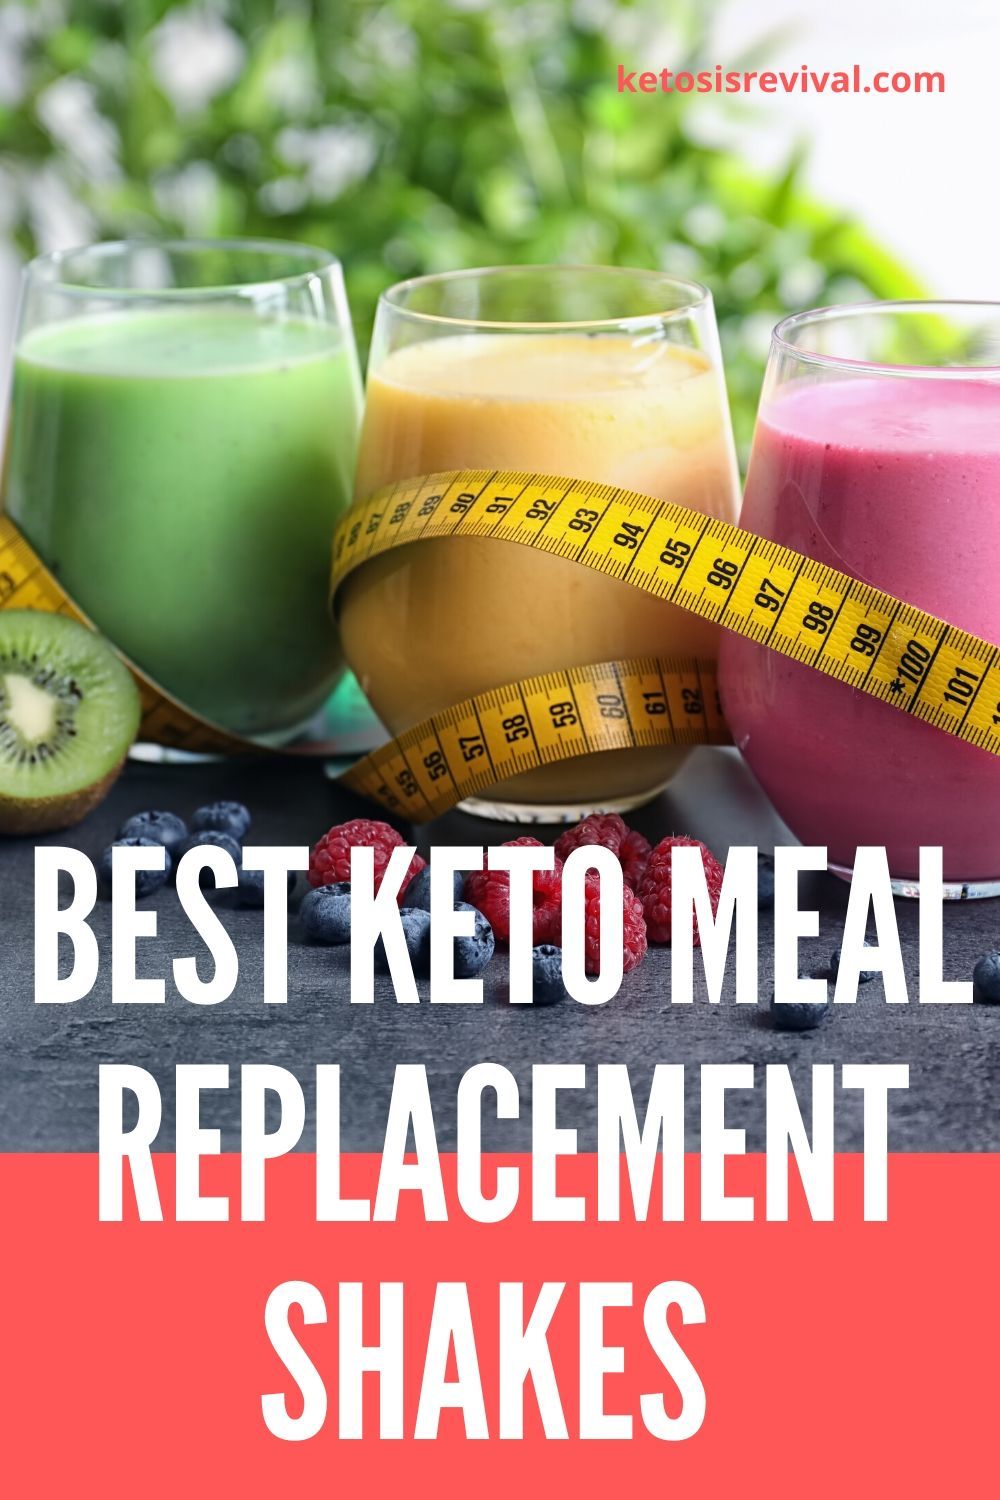 Best Keto Meal Replacement Shakes in 2020